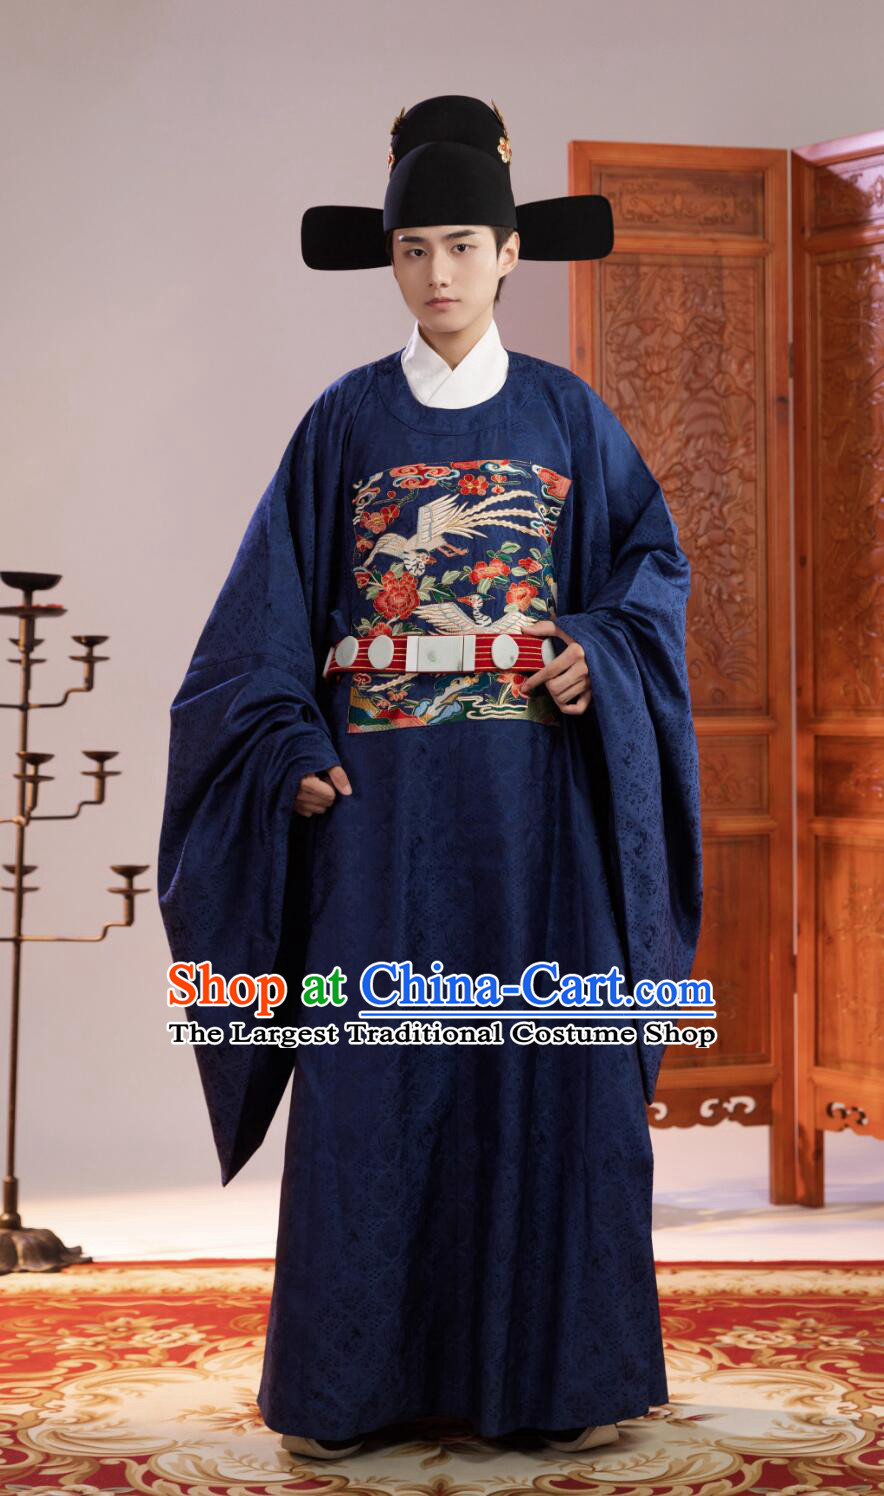 Navy Blue Chinese Embroidered Cranes Robe Ming Dynasty Court Costume Ancient China Fifth Rank Civil Official Clothing